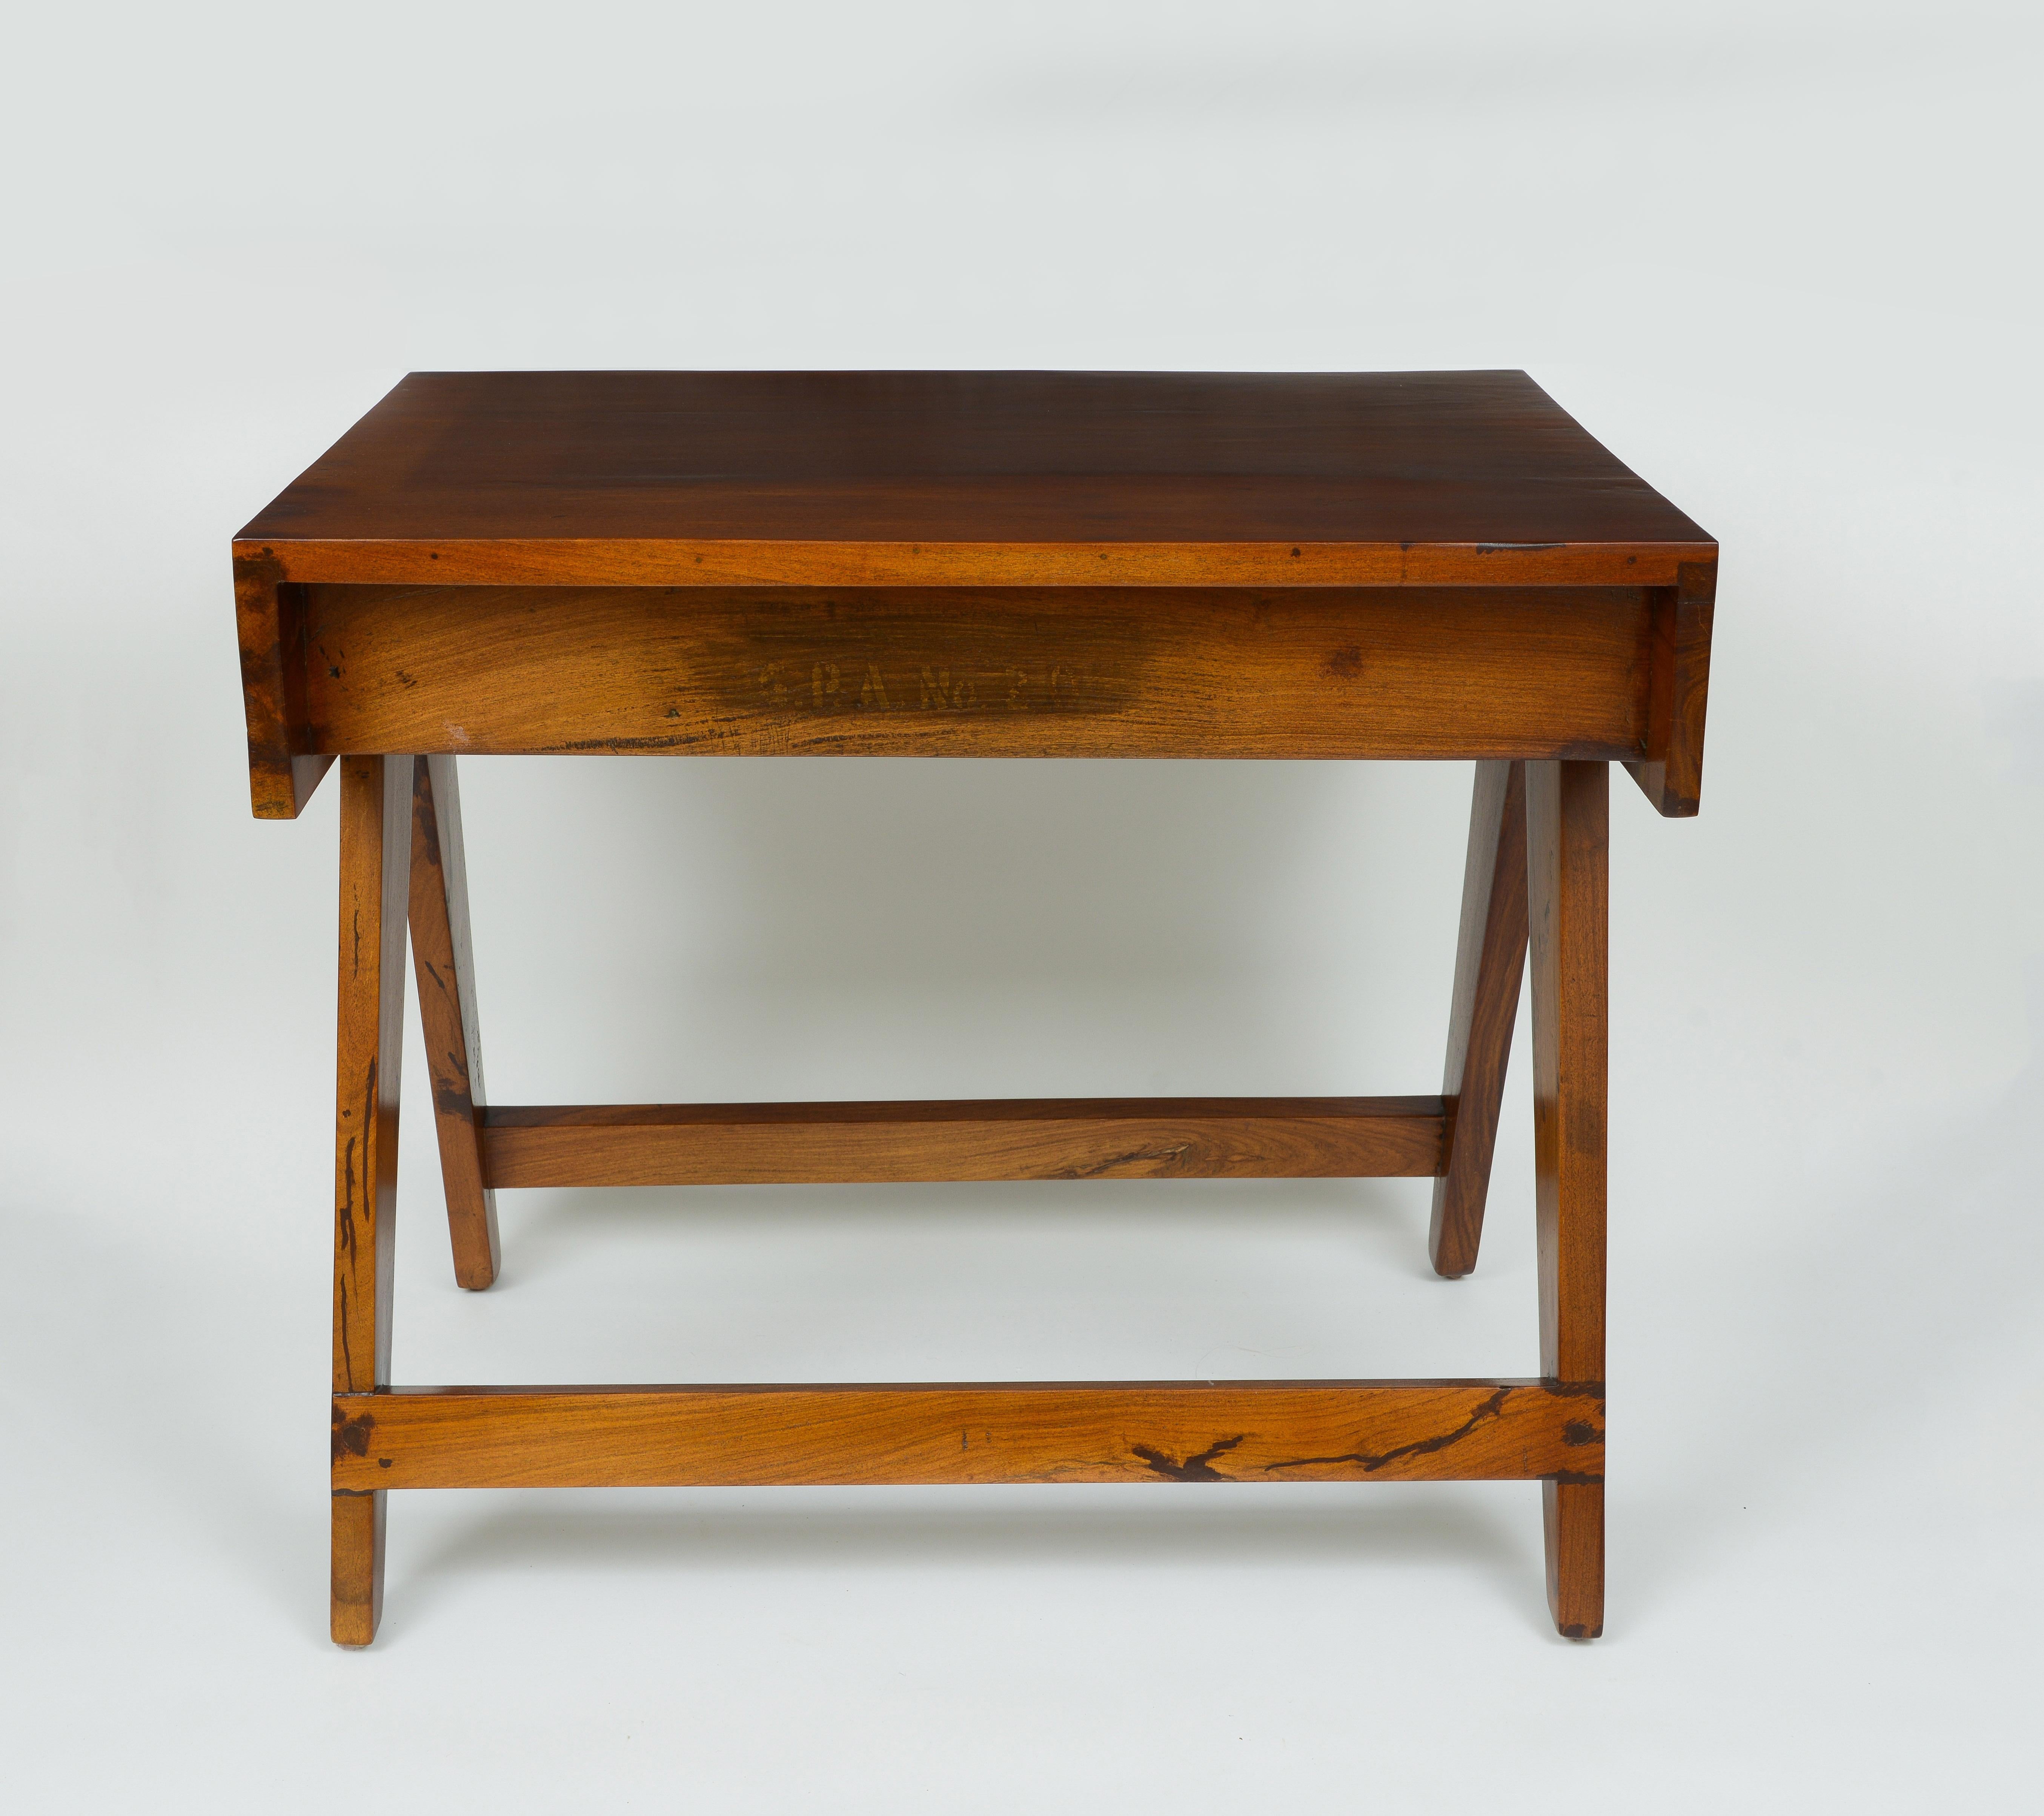 Modern Pierre Jeanneret Desk and Stool from the city of Chandigarh, India 1950 - 1959 For Sale